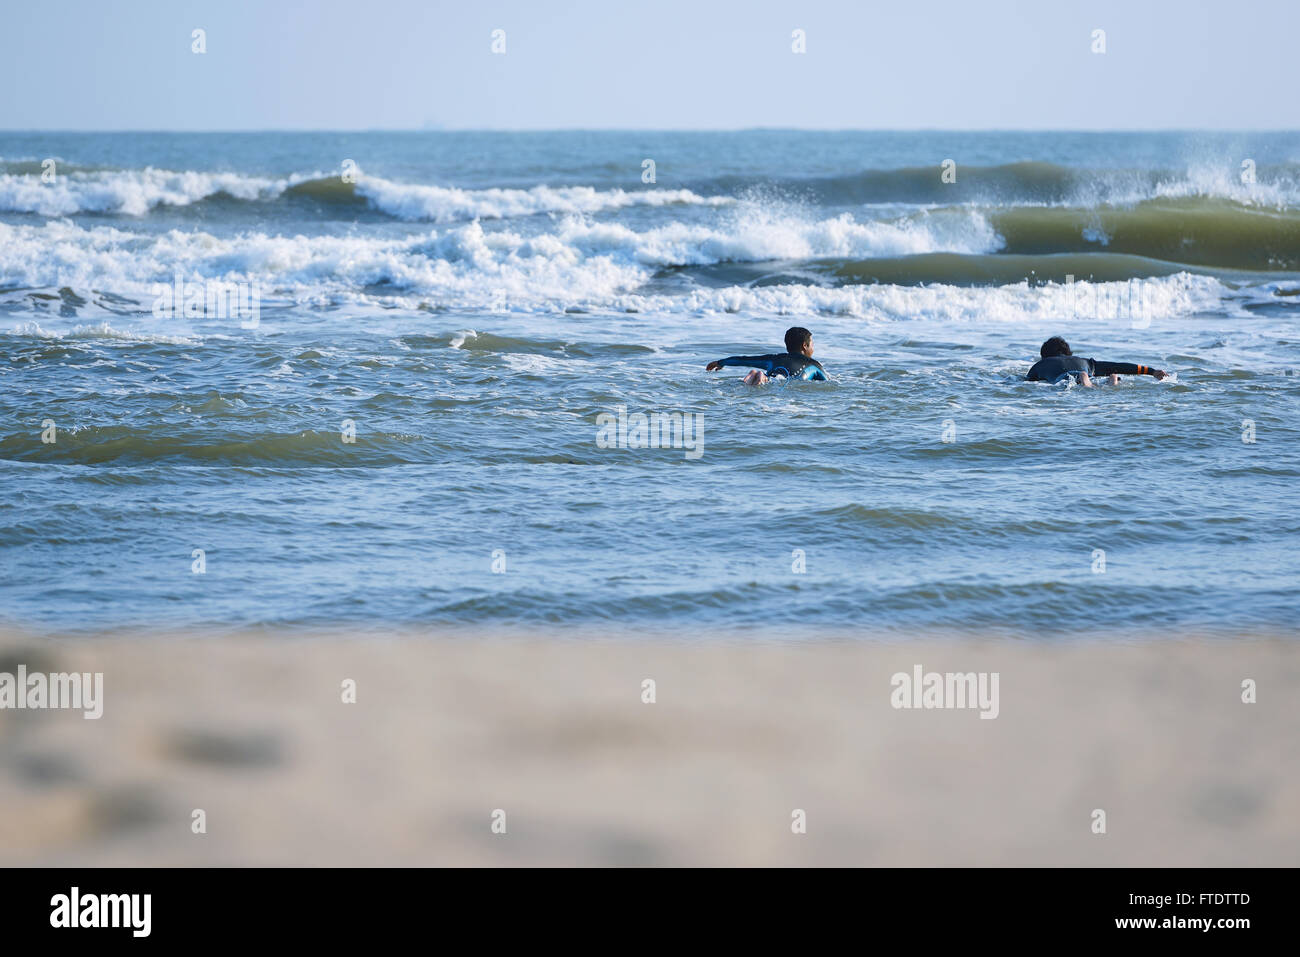 Japanese surfers paddling in the sea Stock Photo